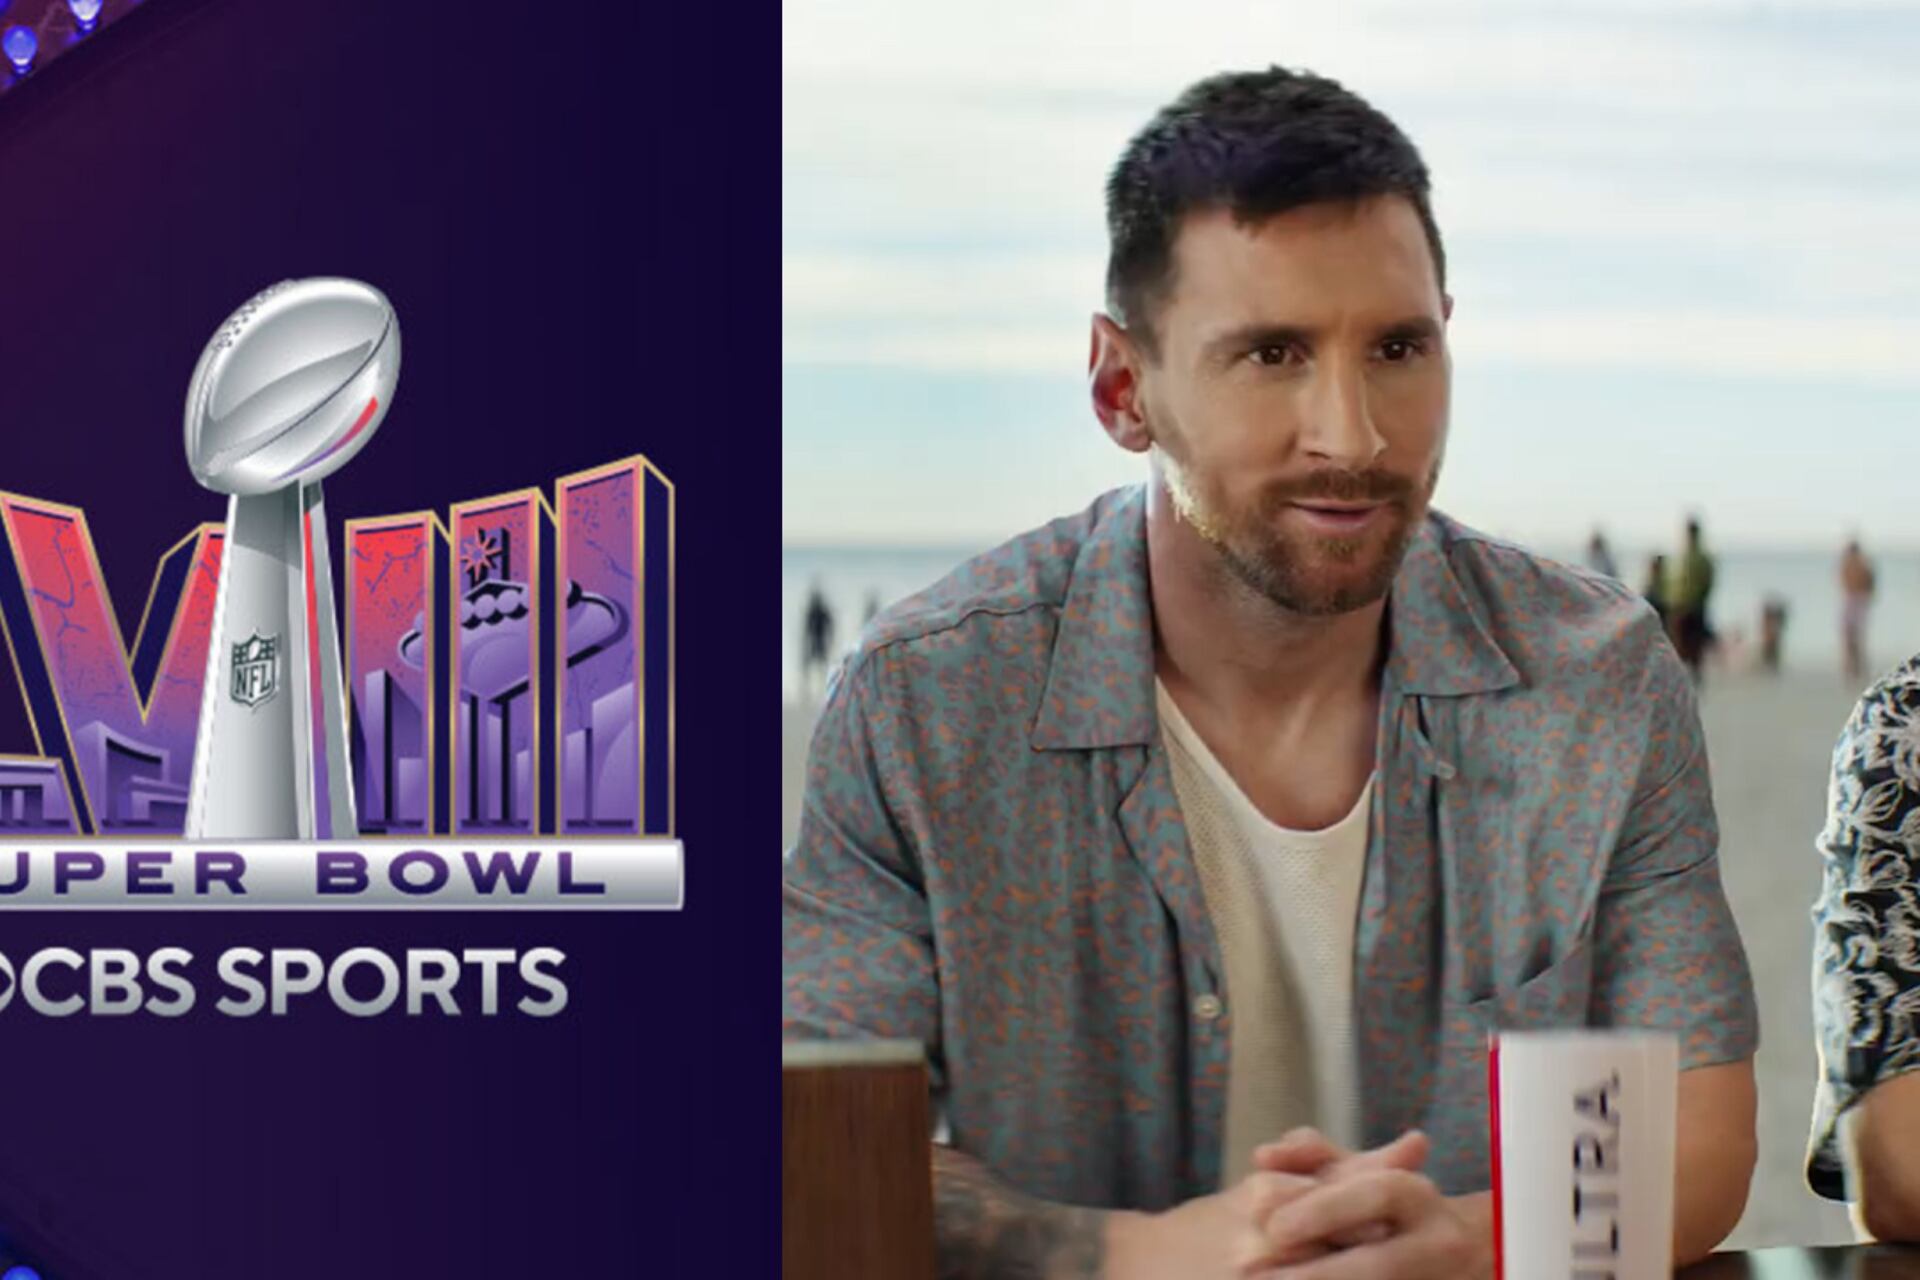 Not for everyone, the social media critics received by Messi’s Super Bowl spot